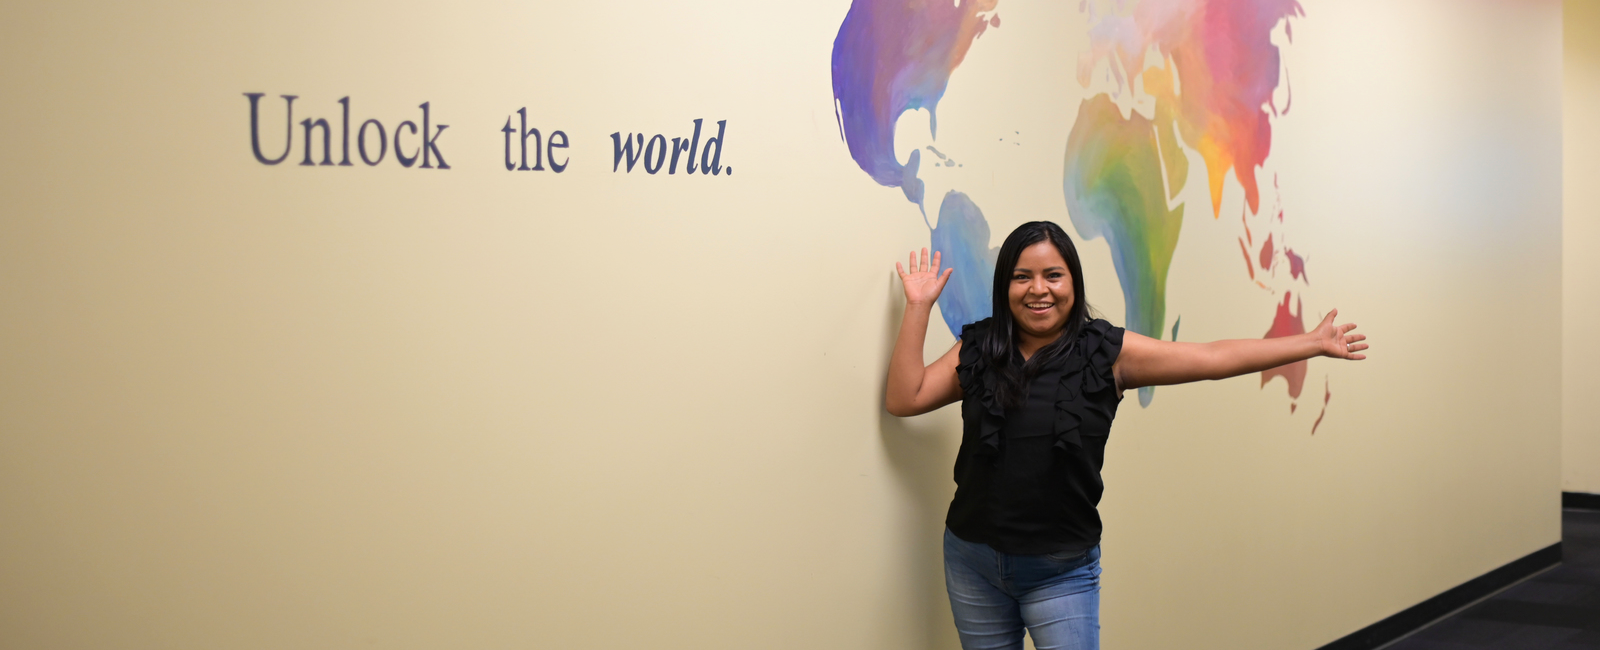 Female student holding her arms up and smiling in front of a map mural with text Unlock the World